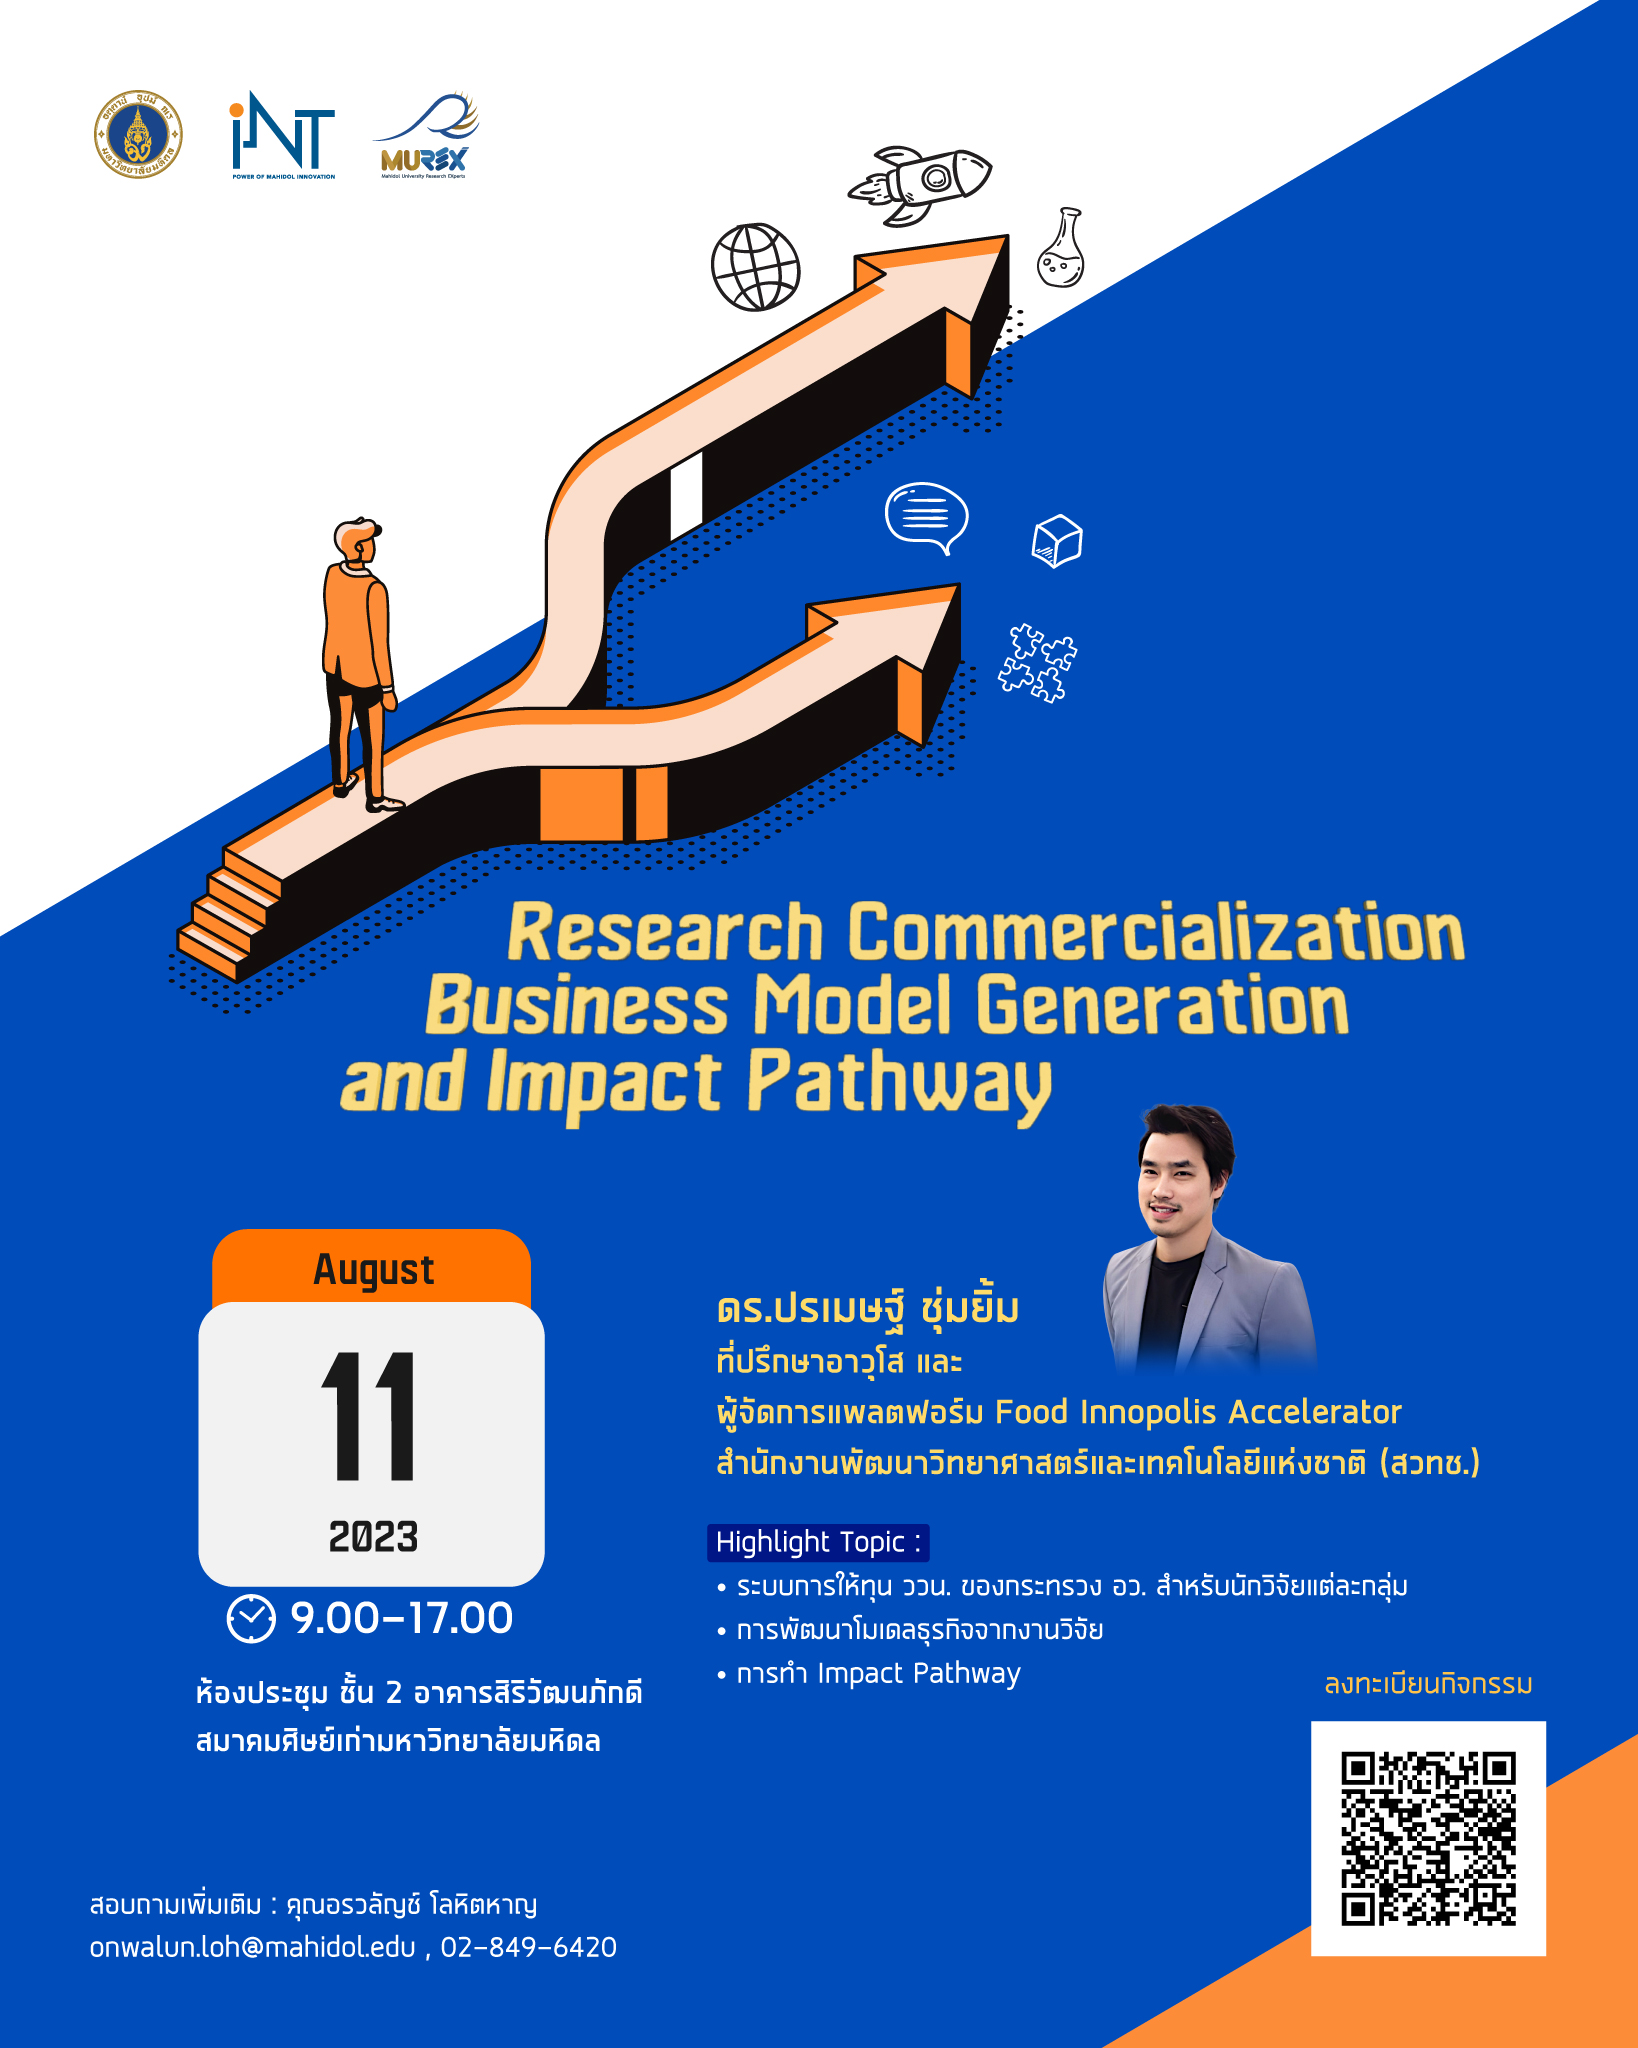 Research Commercialization Business Model Generation and Impact Pathway